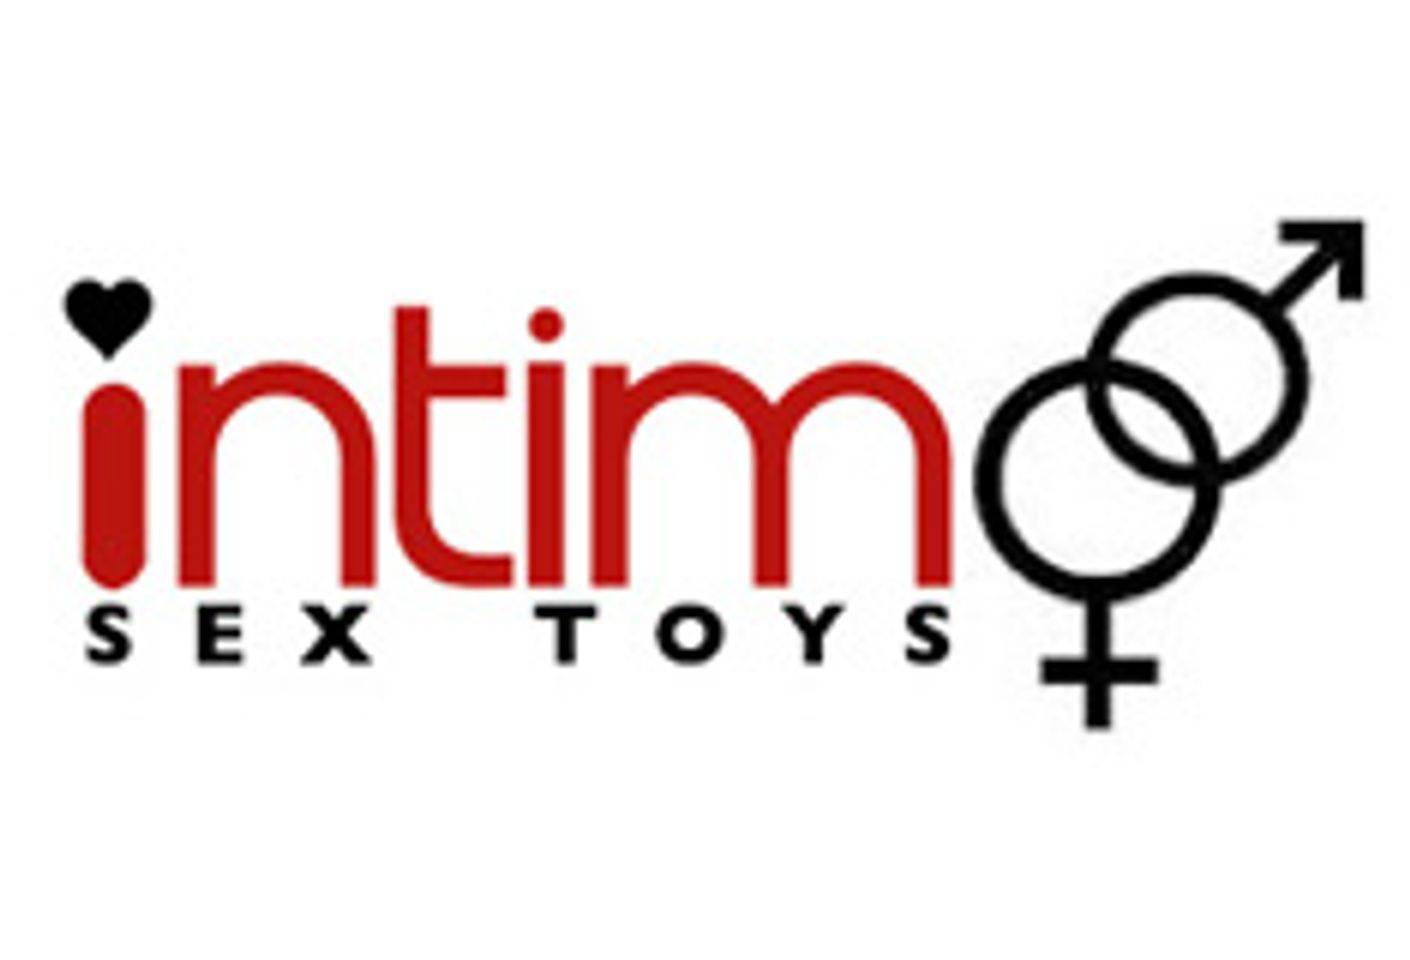 Intimo Sex Toys Opens Online Store with Great Success